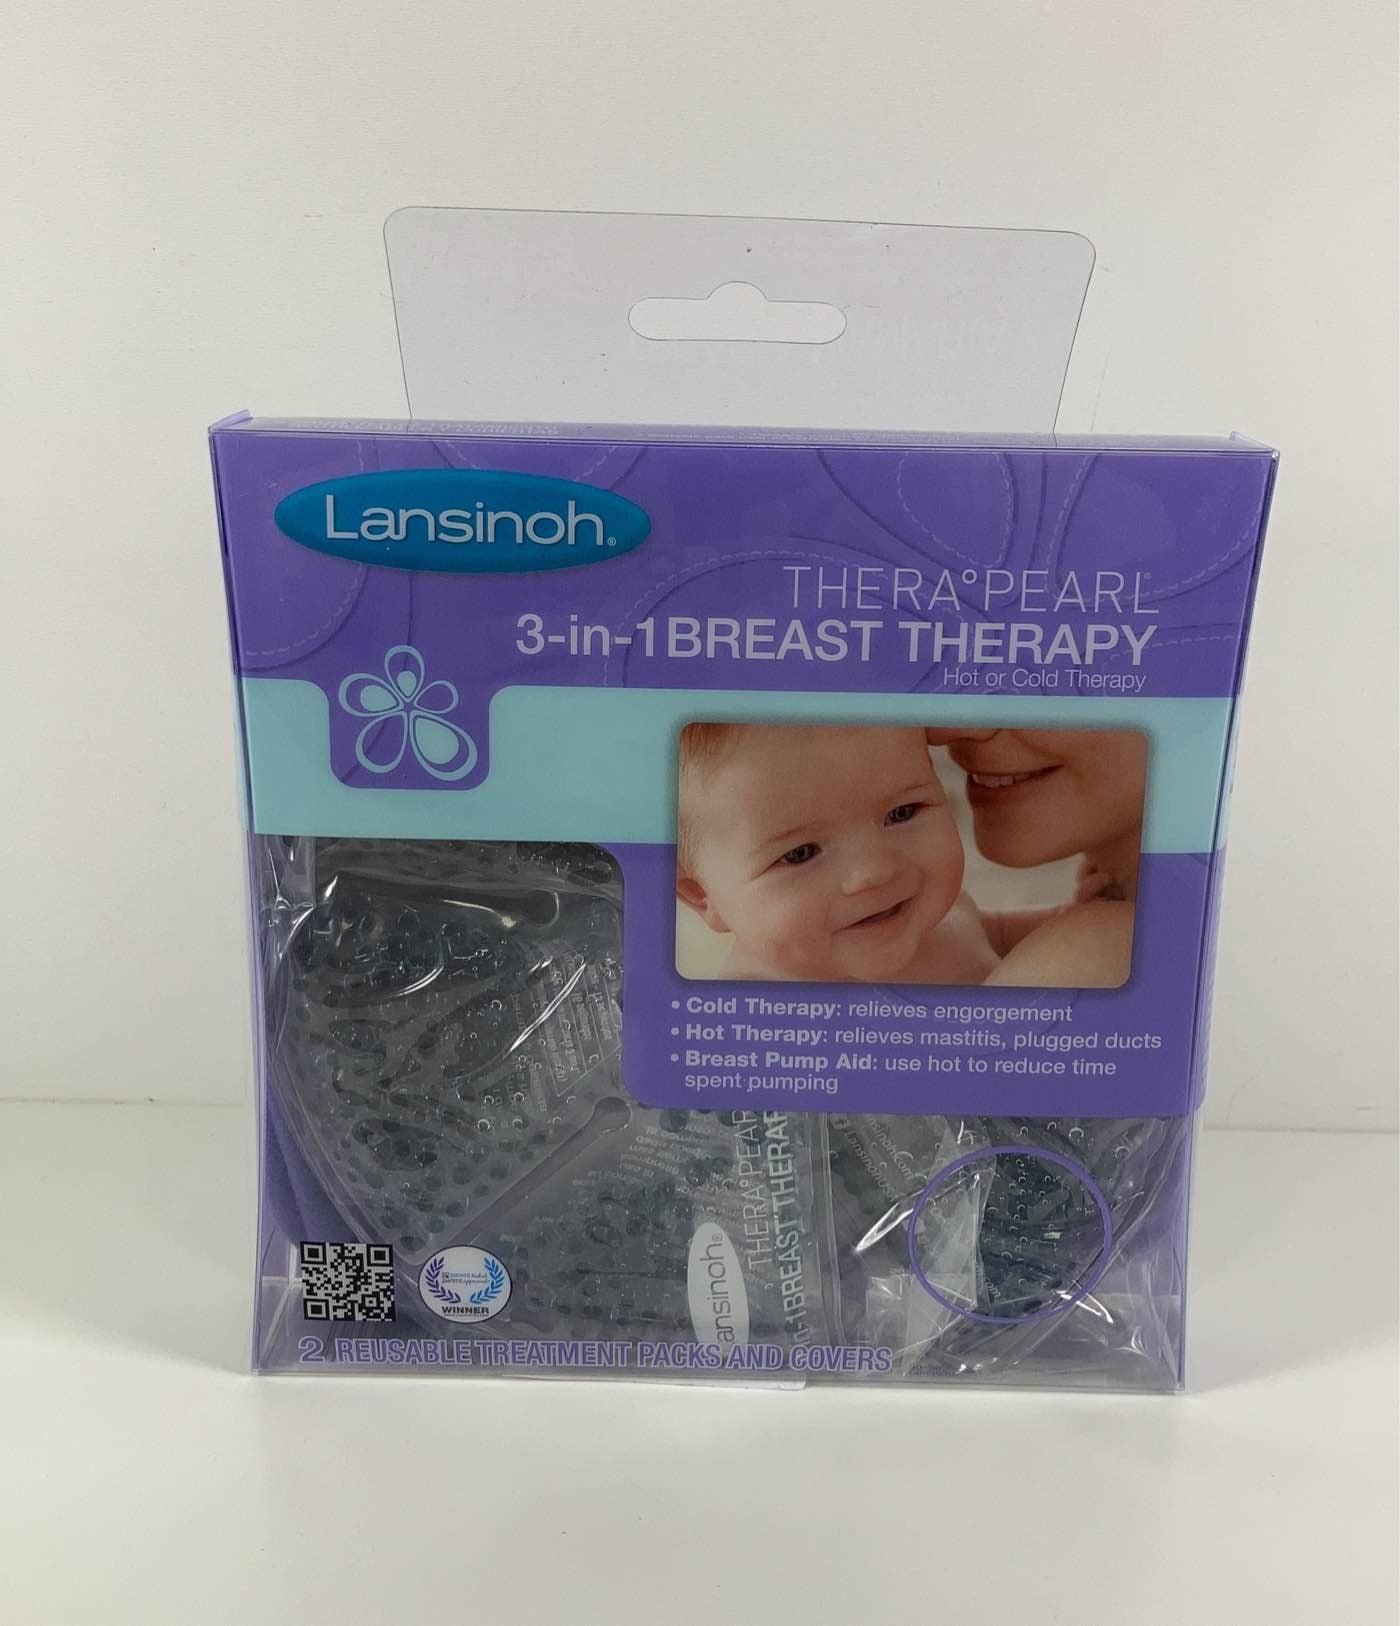 3-in-1 Breast Therapy Packs